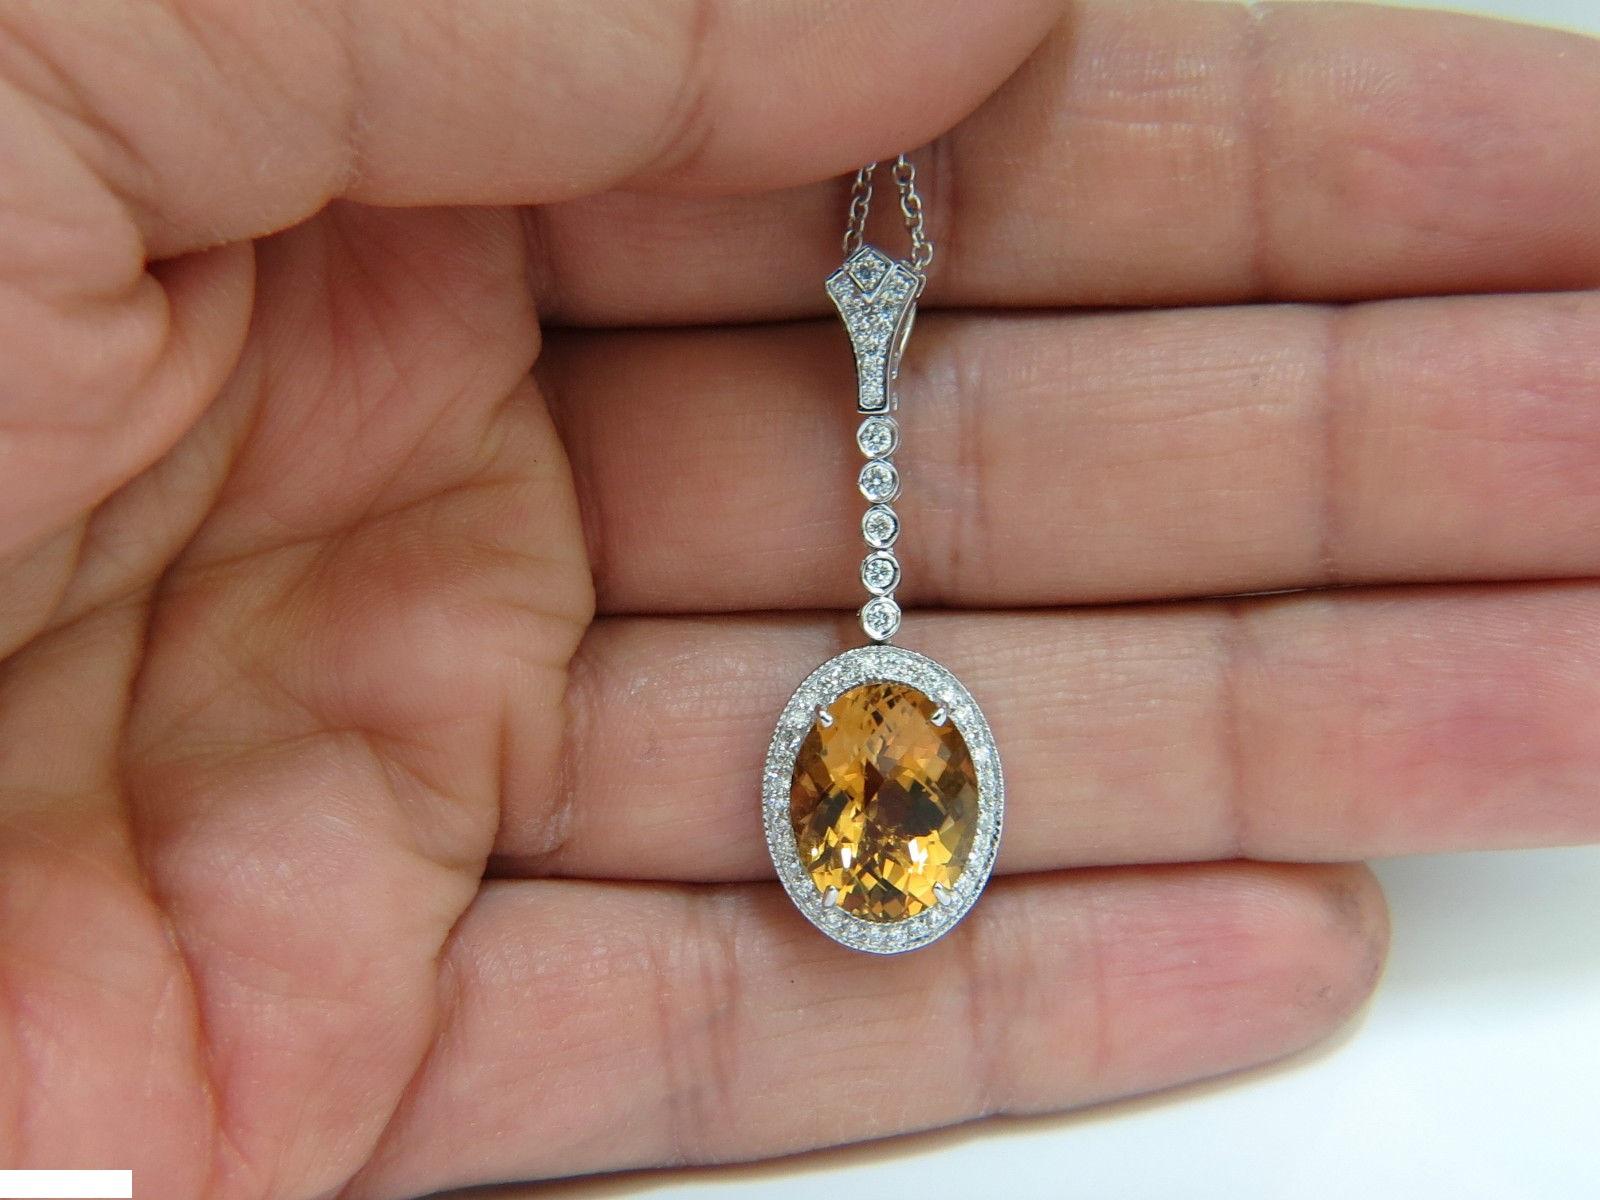 7.00ct. Natural Honey color citrine

Brilliant Rose cut.

Clean Clarity

14.2 X 11.3mm

Side diamonds:

.75ct. 

Rounds, full cuts.

G-color, Vs-2 clarity

14kt. white gold

Excellent sparkle 

7.7gms. 

Pendant: 1.6 inches long

Necklace 18 Inches